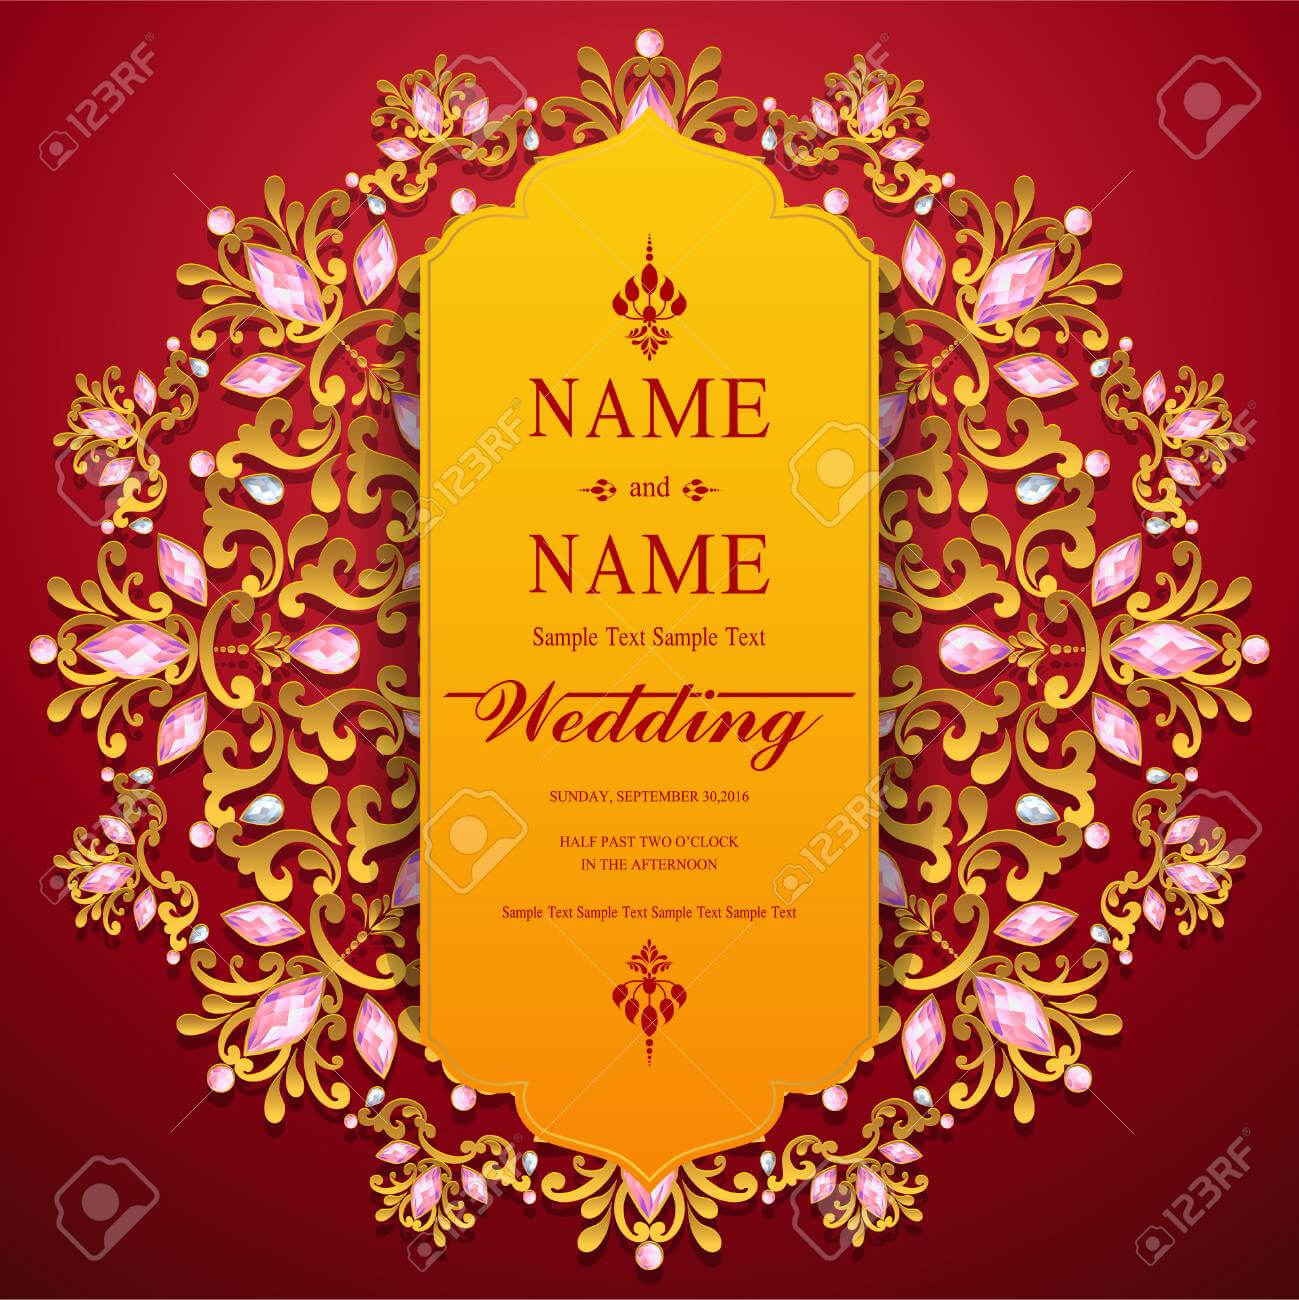 Wedding Invitation Card Templates With Gold Patterned And Crystals.. Pertaining To Sample Wedding Invitation Cards Templates